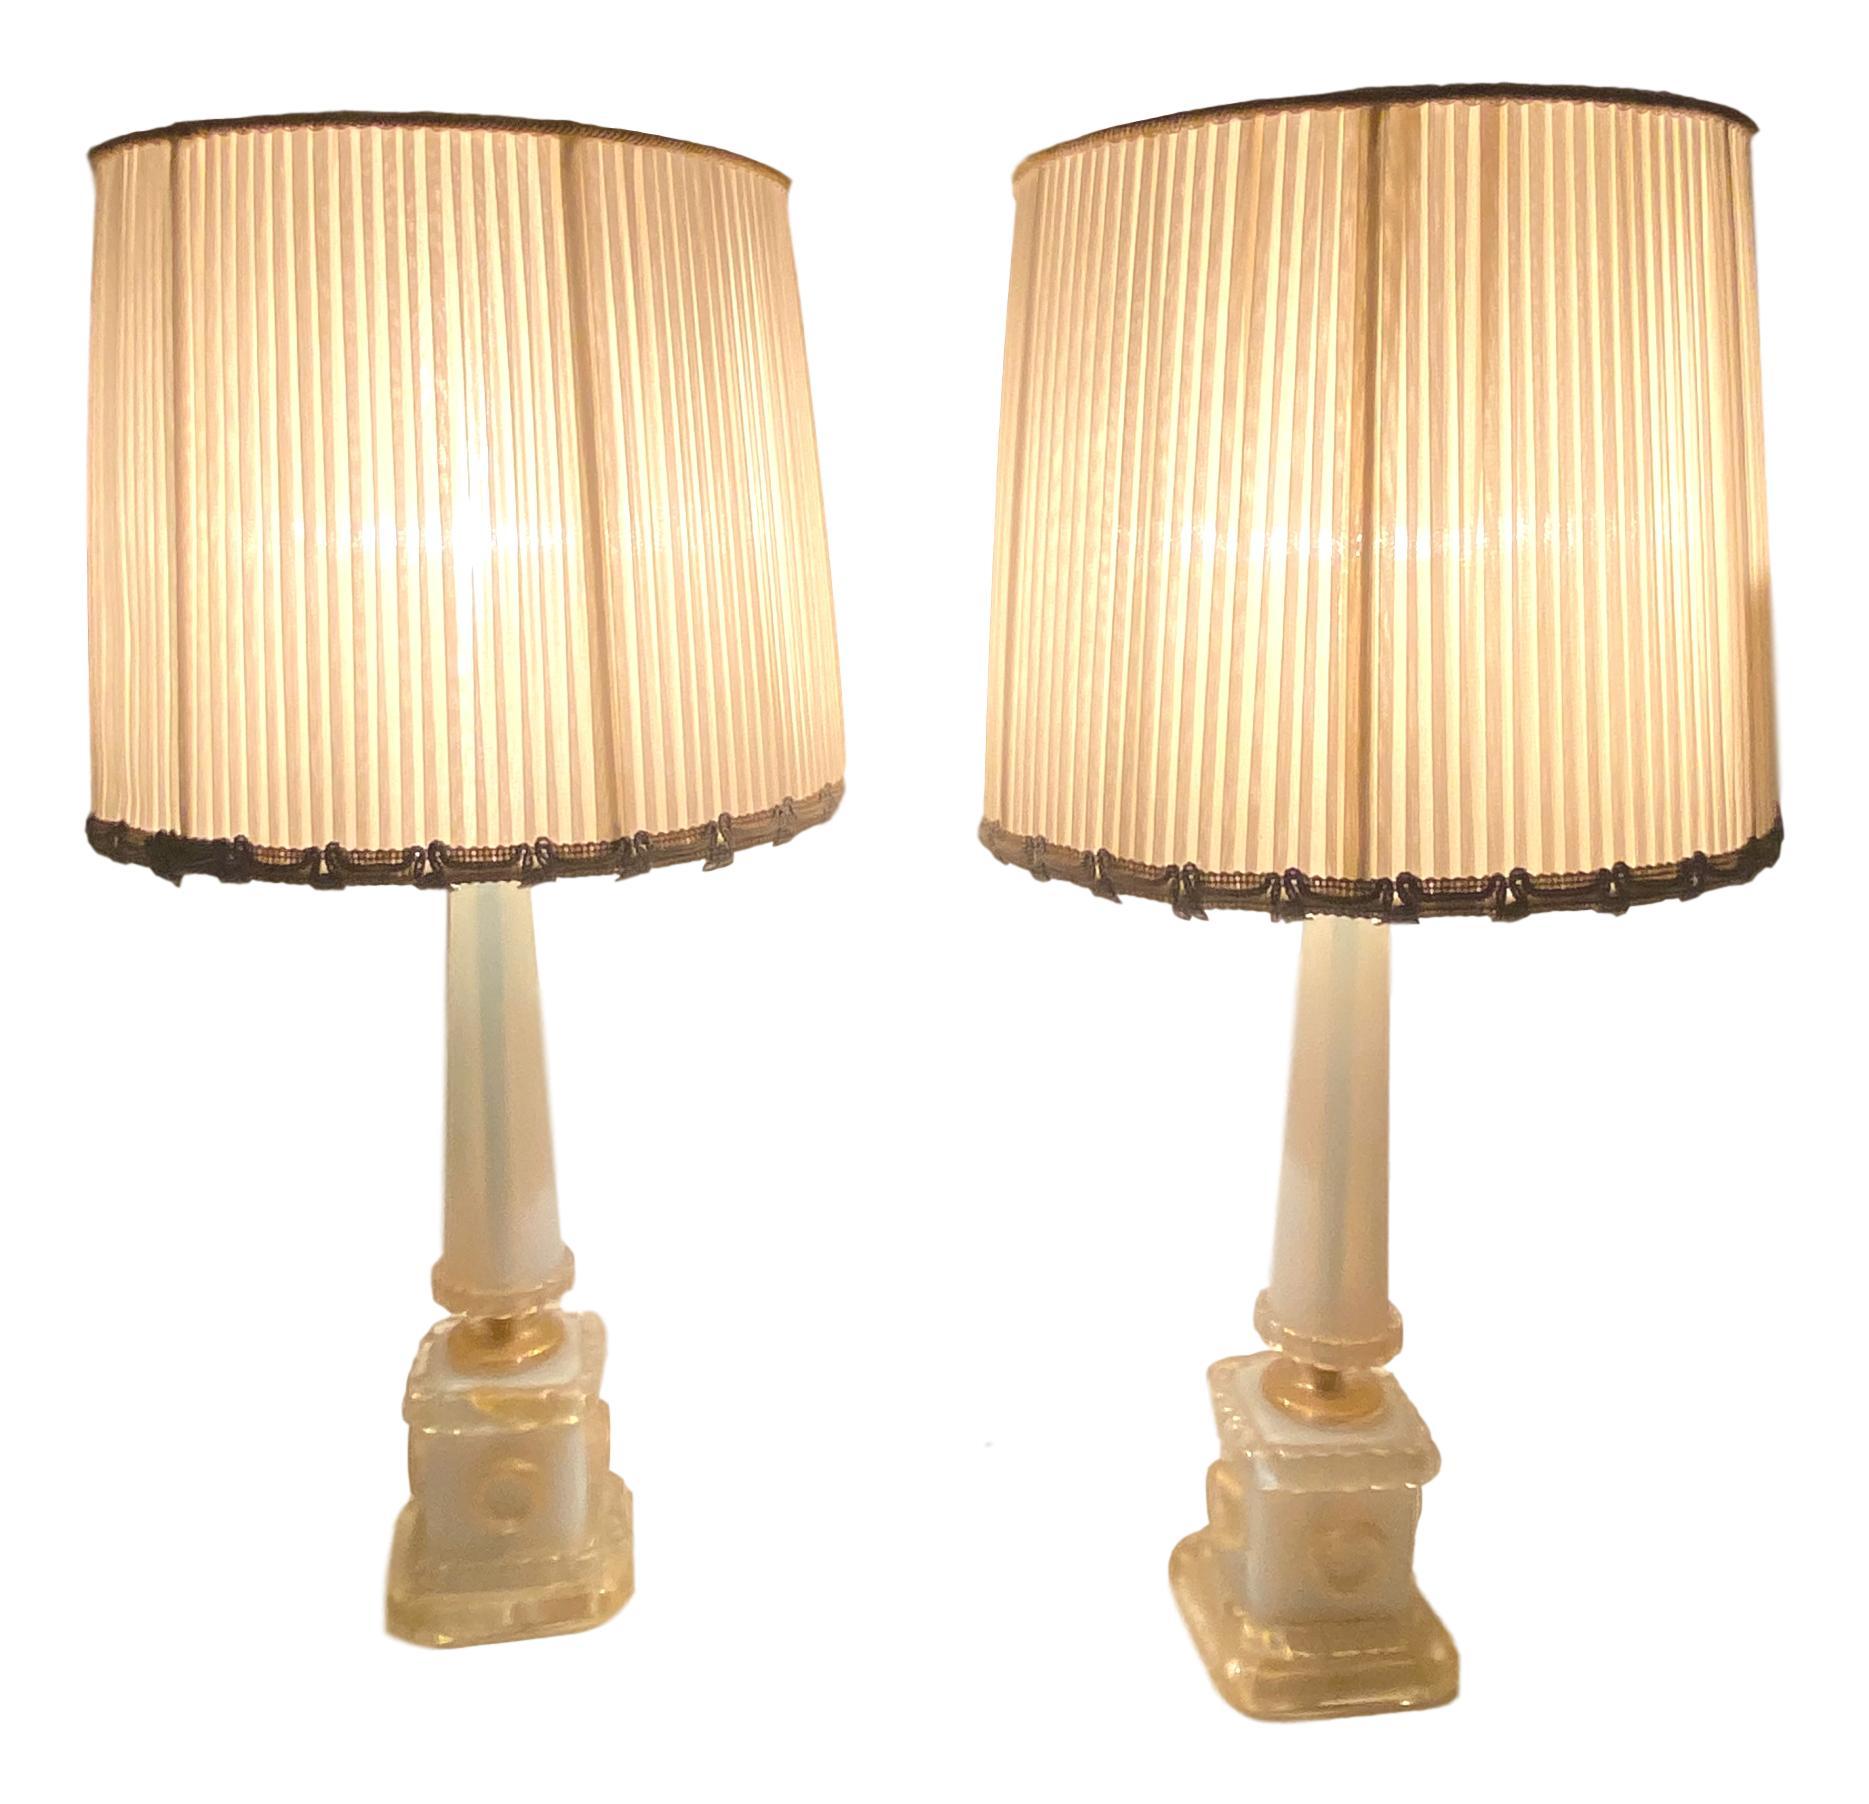 Beautiful pair of large monumental table lamps or side table lamps. Made of iridize and gold infused Murano glass, made by Barovier & Toso Murano, Italy. Each light requires one European E27 / 110 Volt Edison bulb, up to 60 watts. They come with the